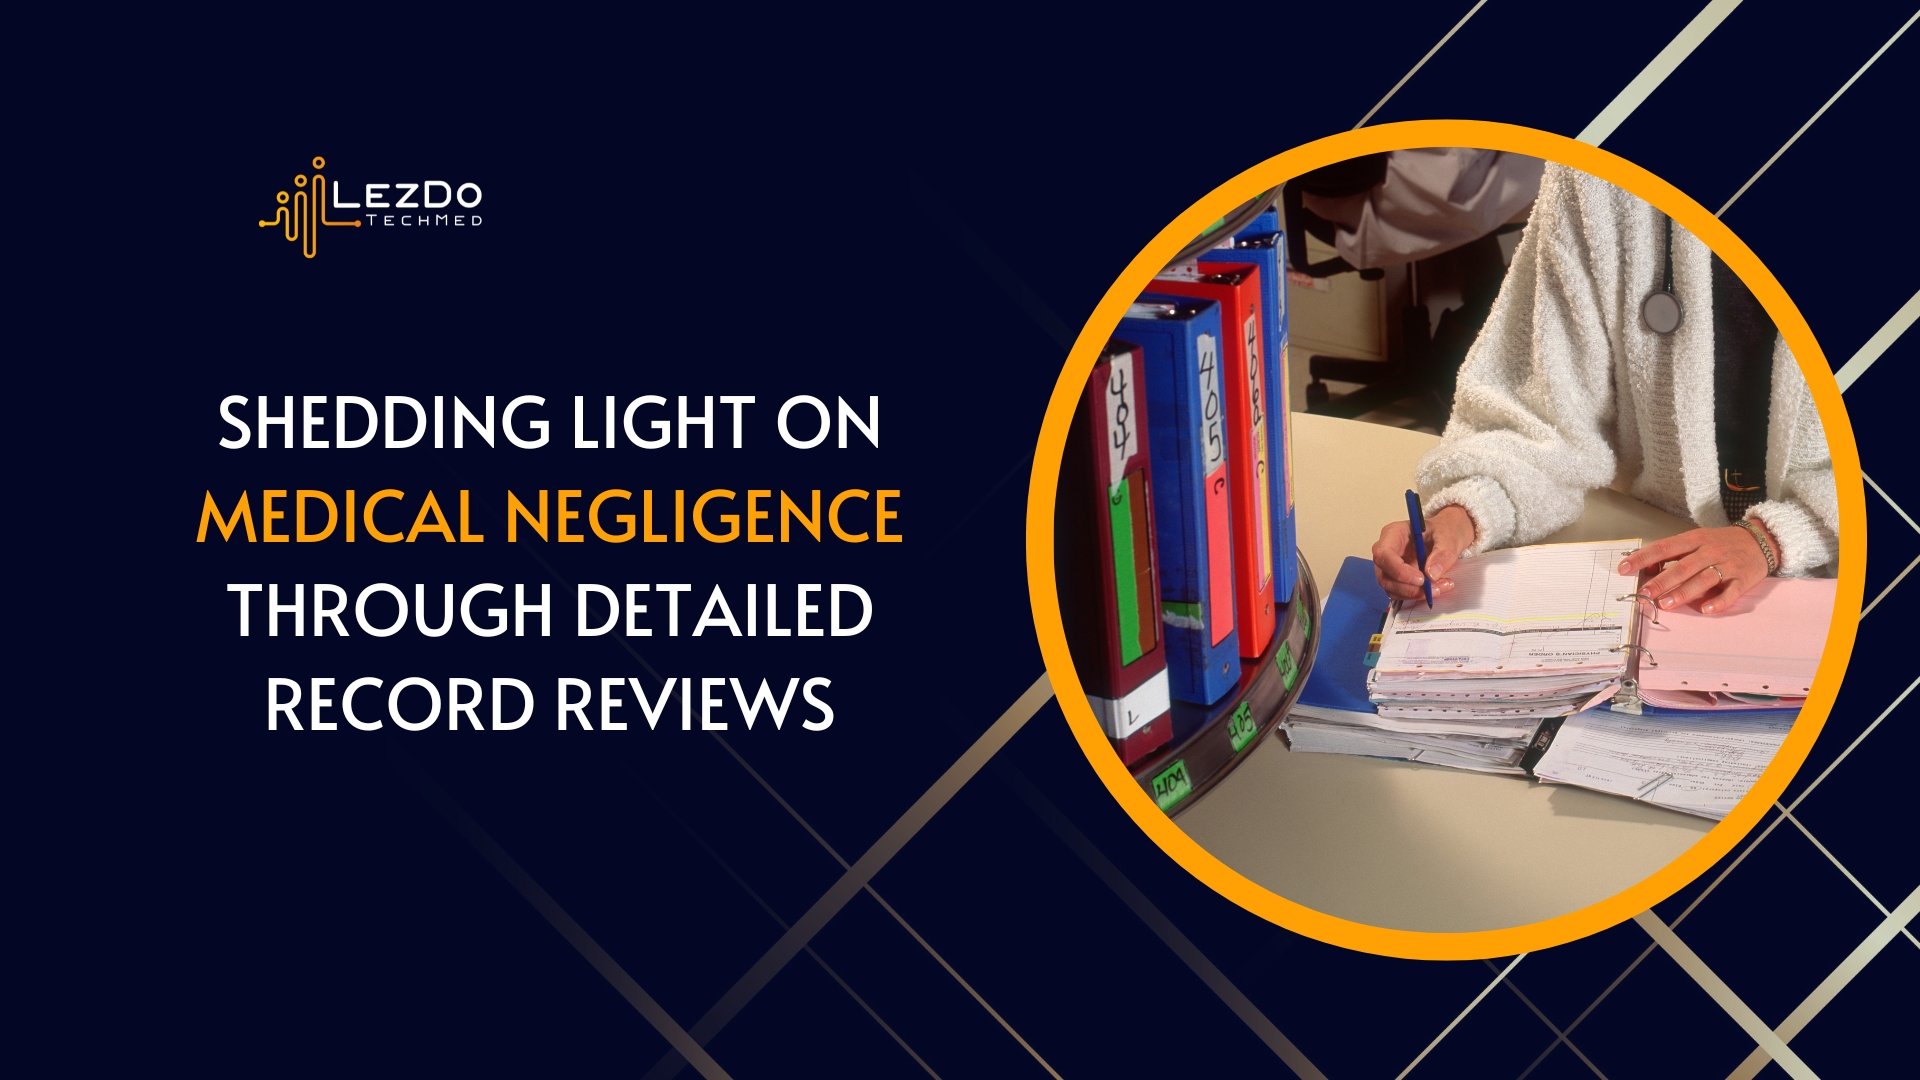 Shedding Light on Medical Negligence through Detailed Record Reviews